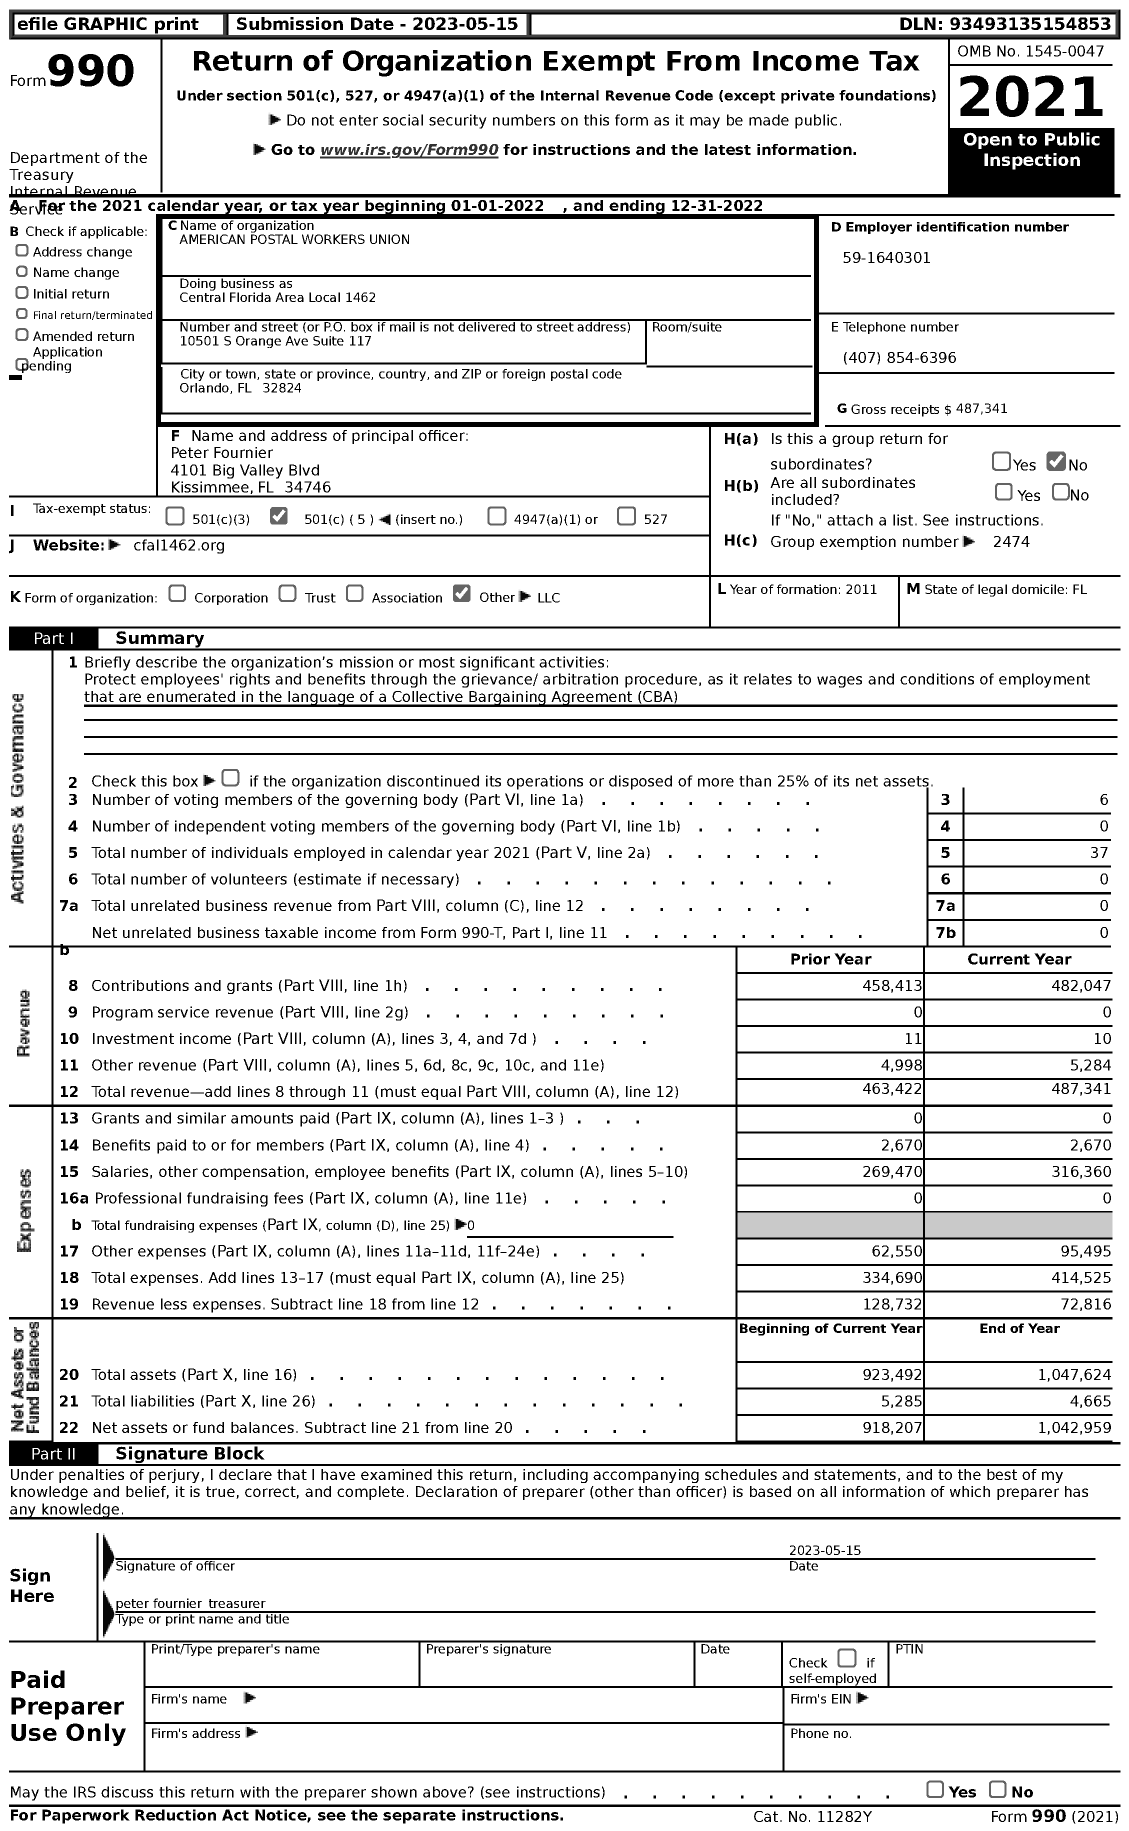 Image of first page of 2022 Form 990 for AMERICAN POSTAL WORKERS UNION Florida ARea Local 1462